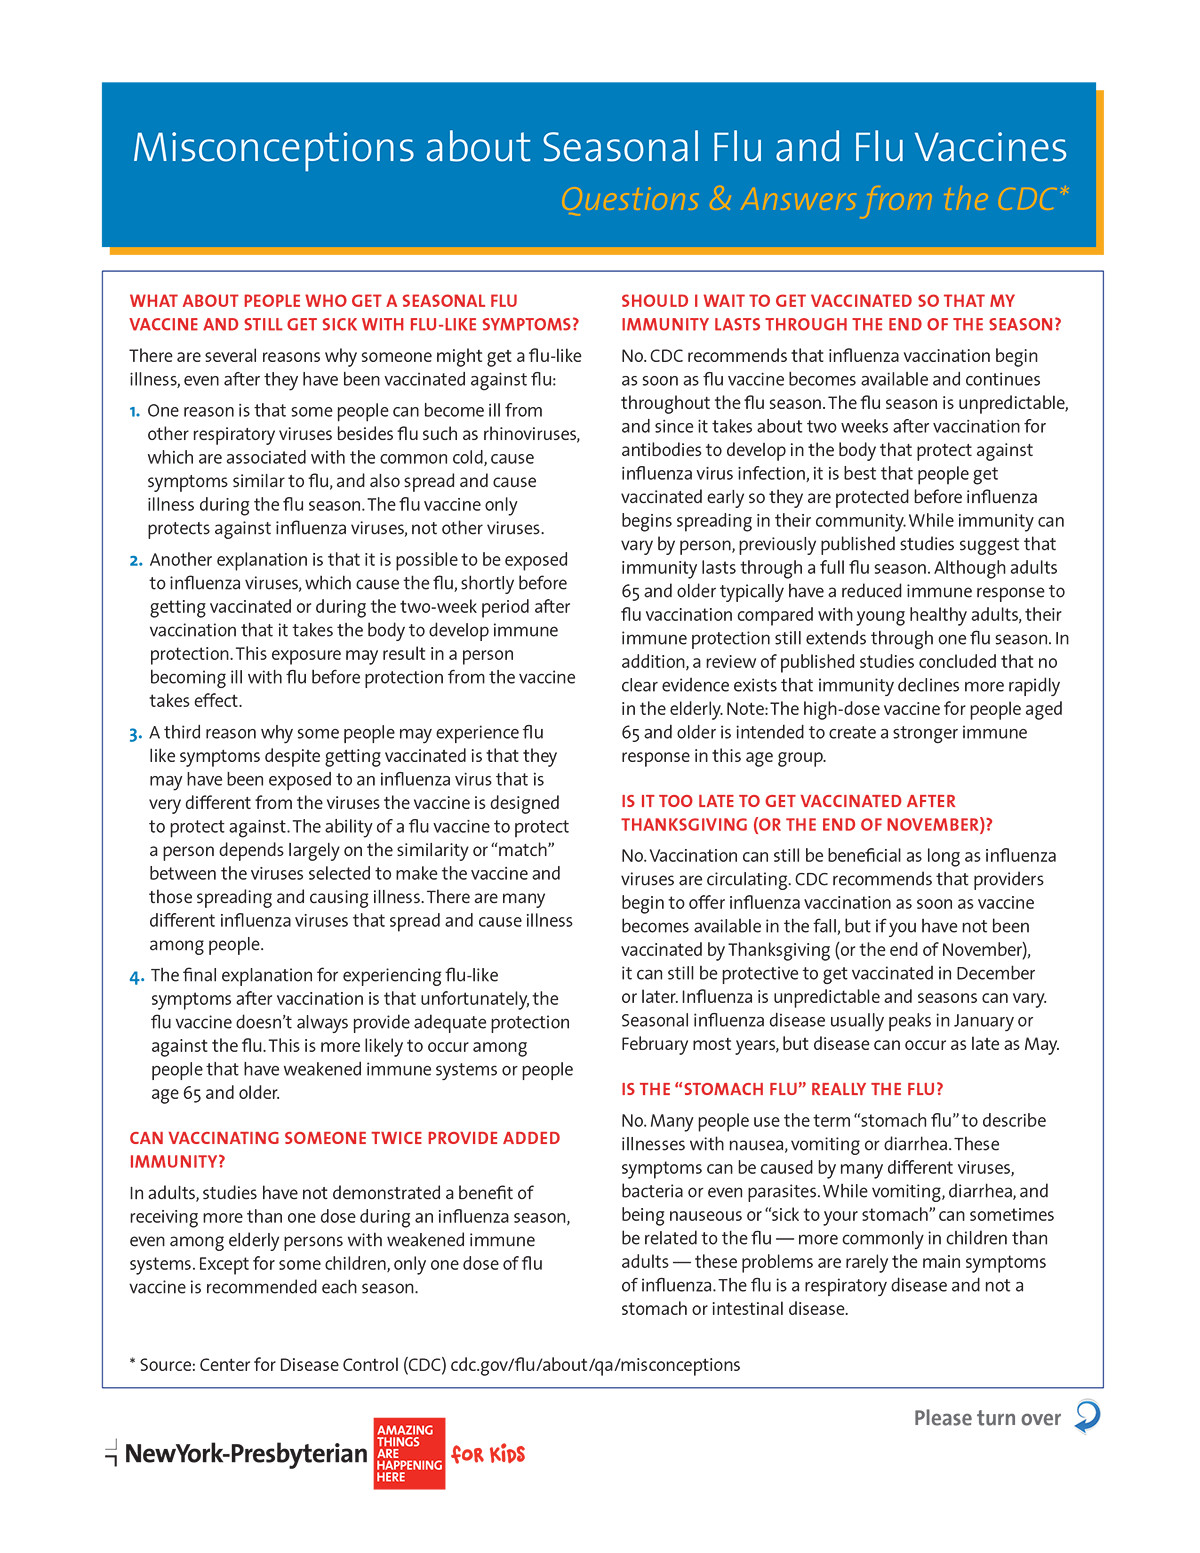 tip sheet about misconceptions about flu and flu vaccines